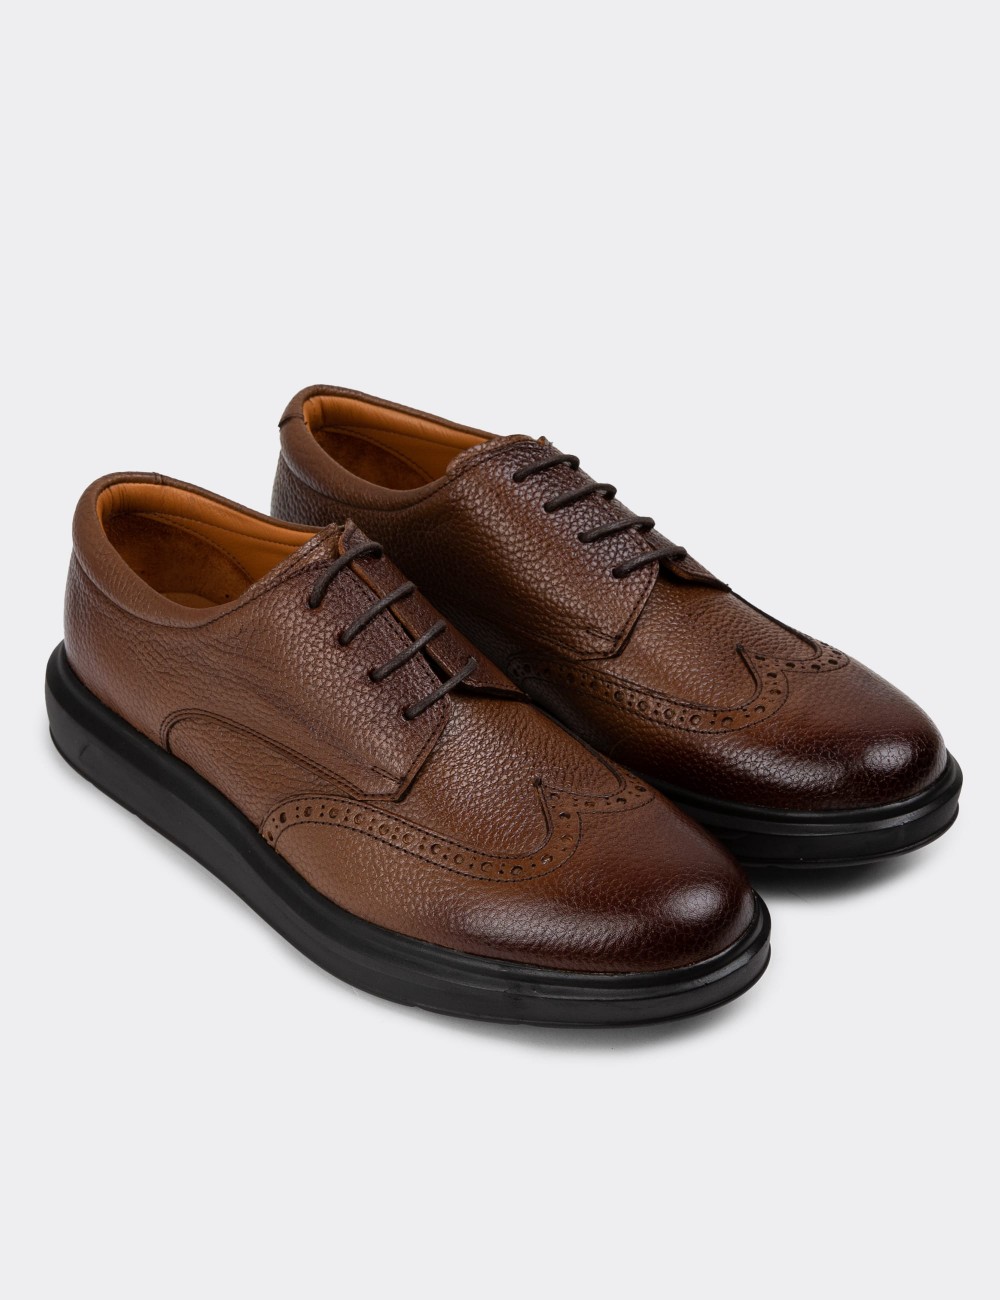 Tan Leather Lace-up Shoes - 01942MTBAP01